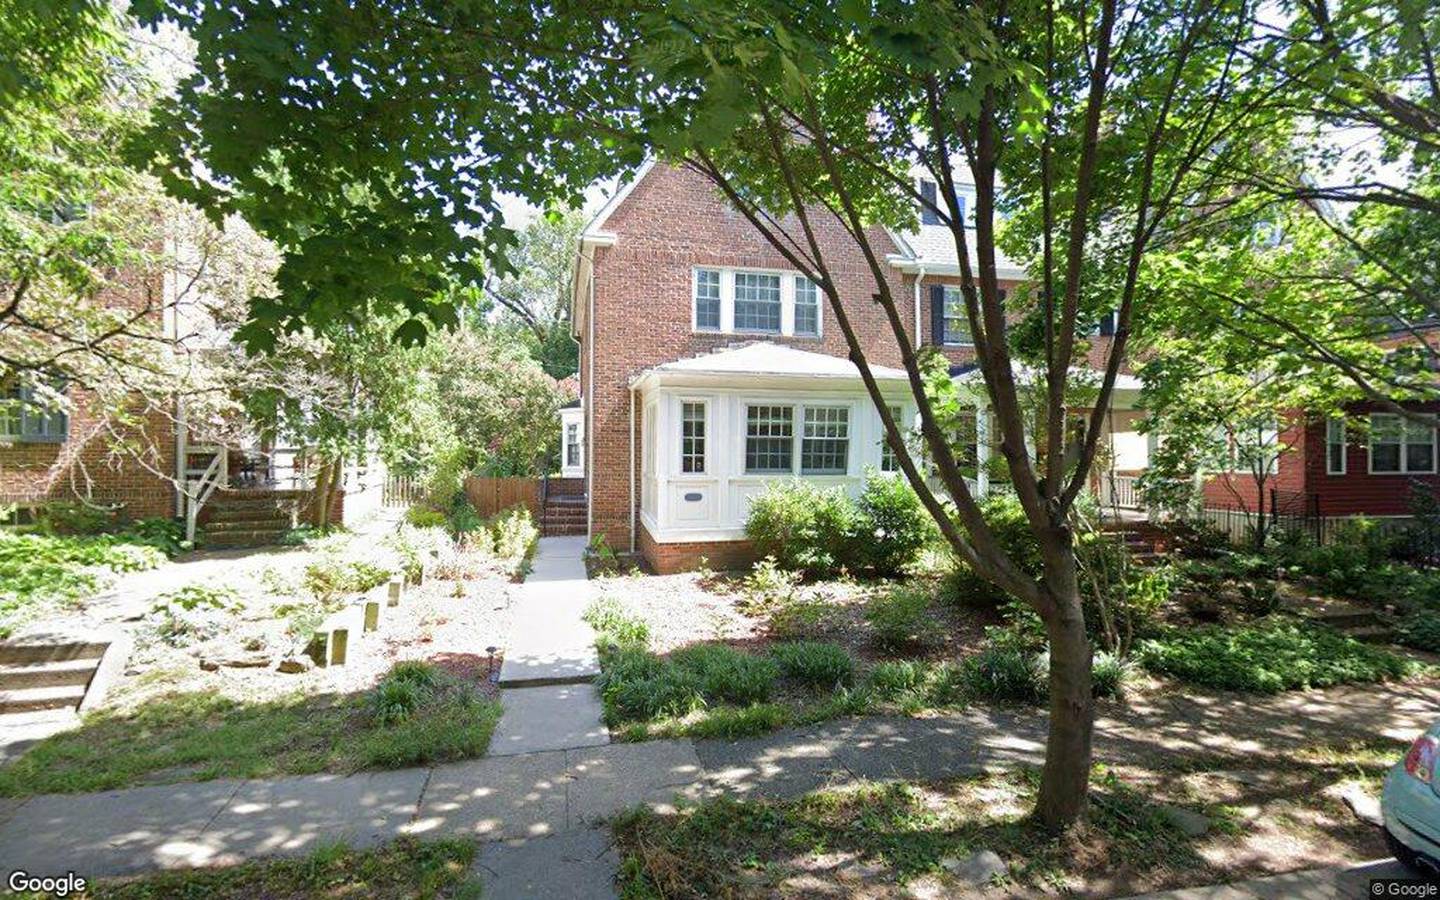 $568,000, townhouse at 4219 Wickford Road 